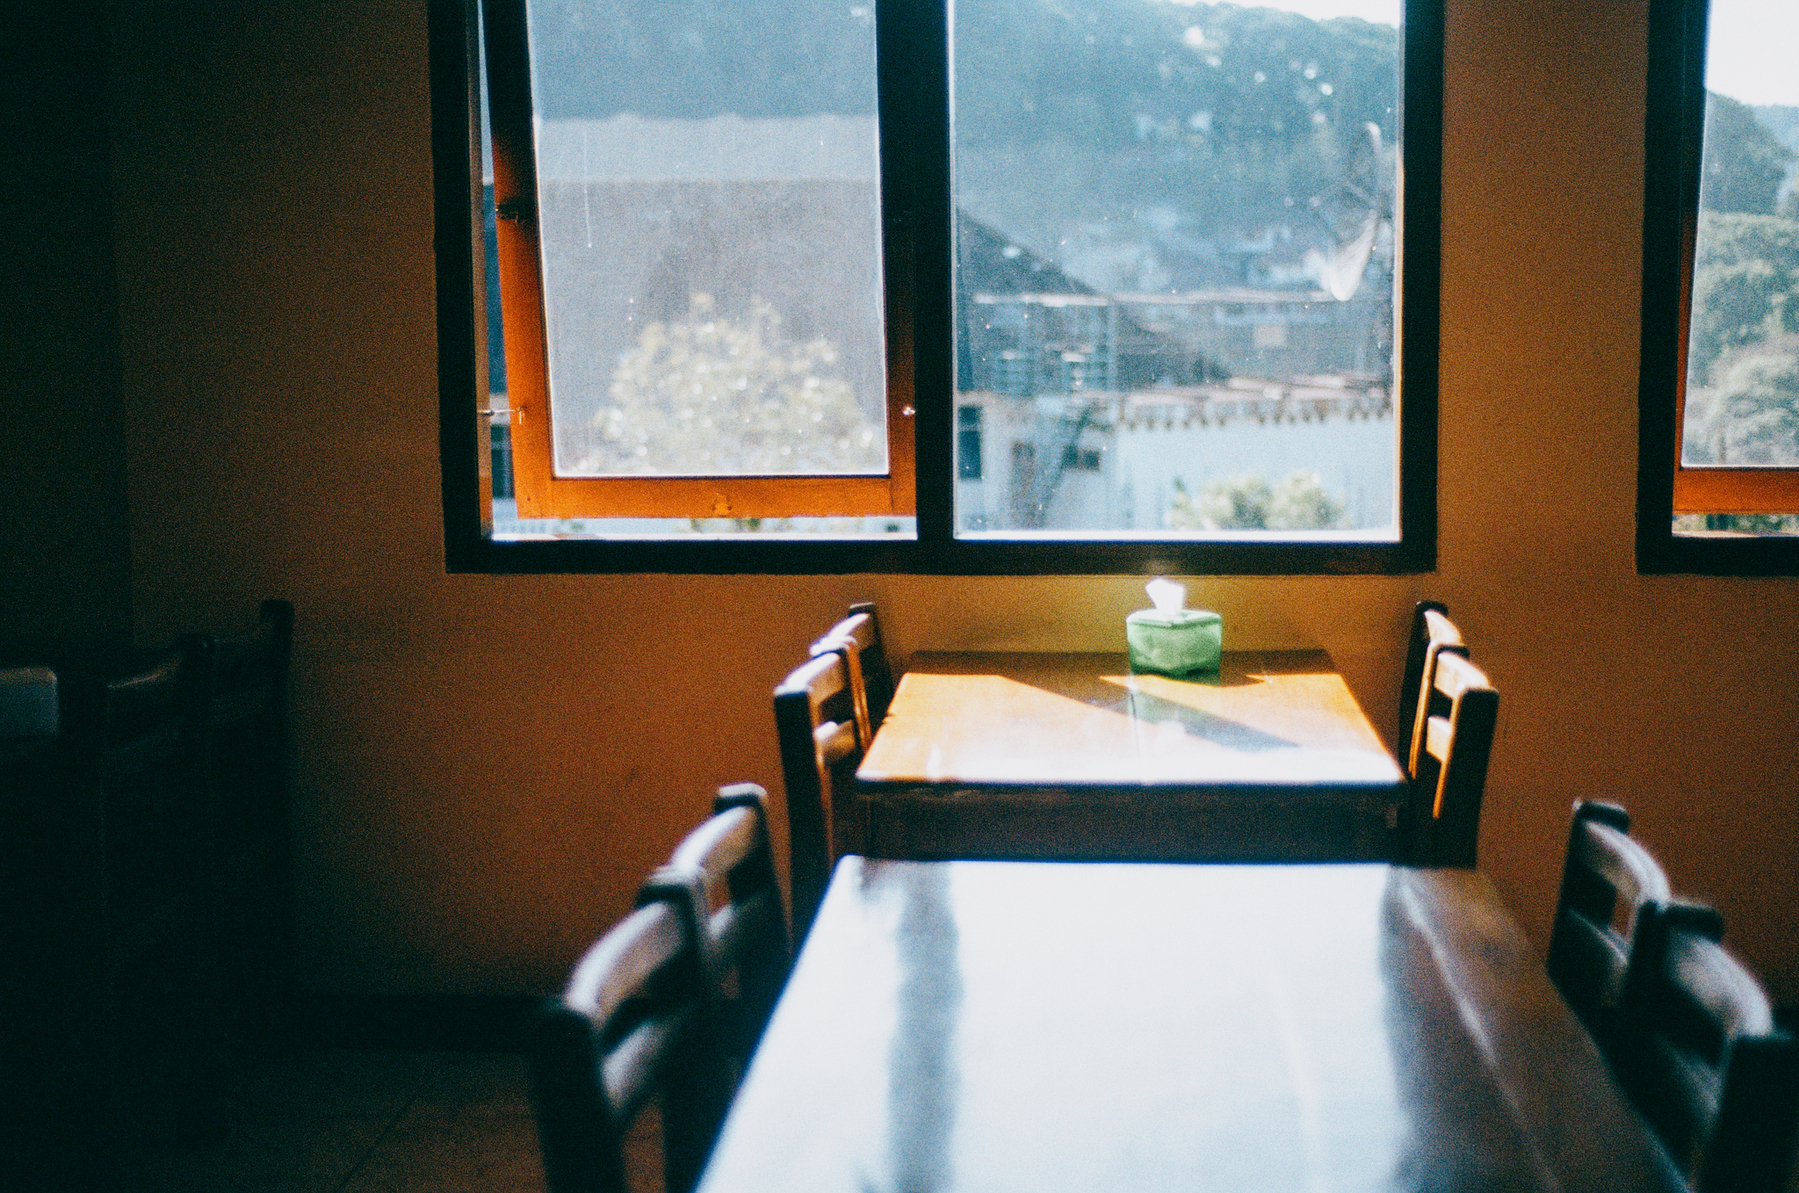 2. a scan of a color photo of wooden tables inside a restaurant that is slightly dark, with sunlight streaming onto a table that has a tissue paper box